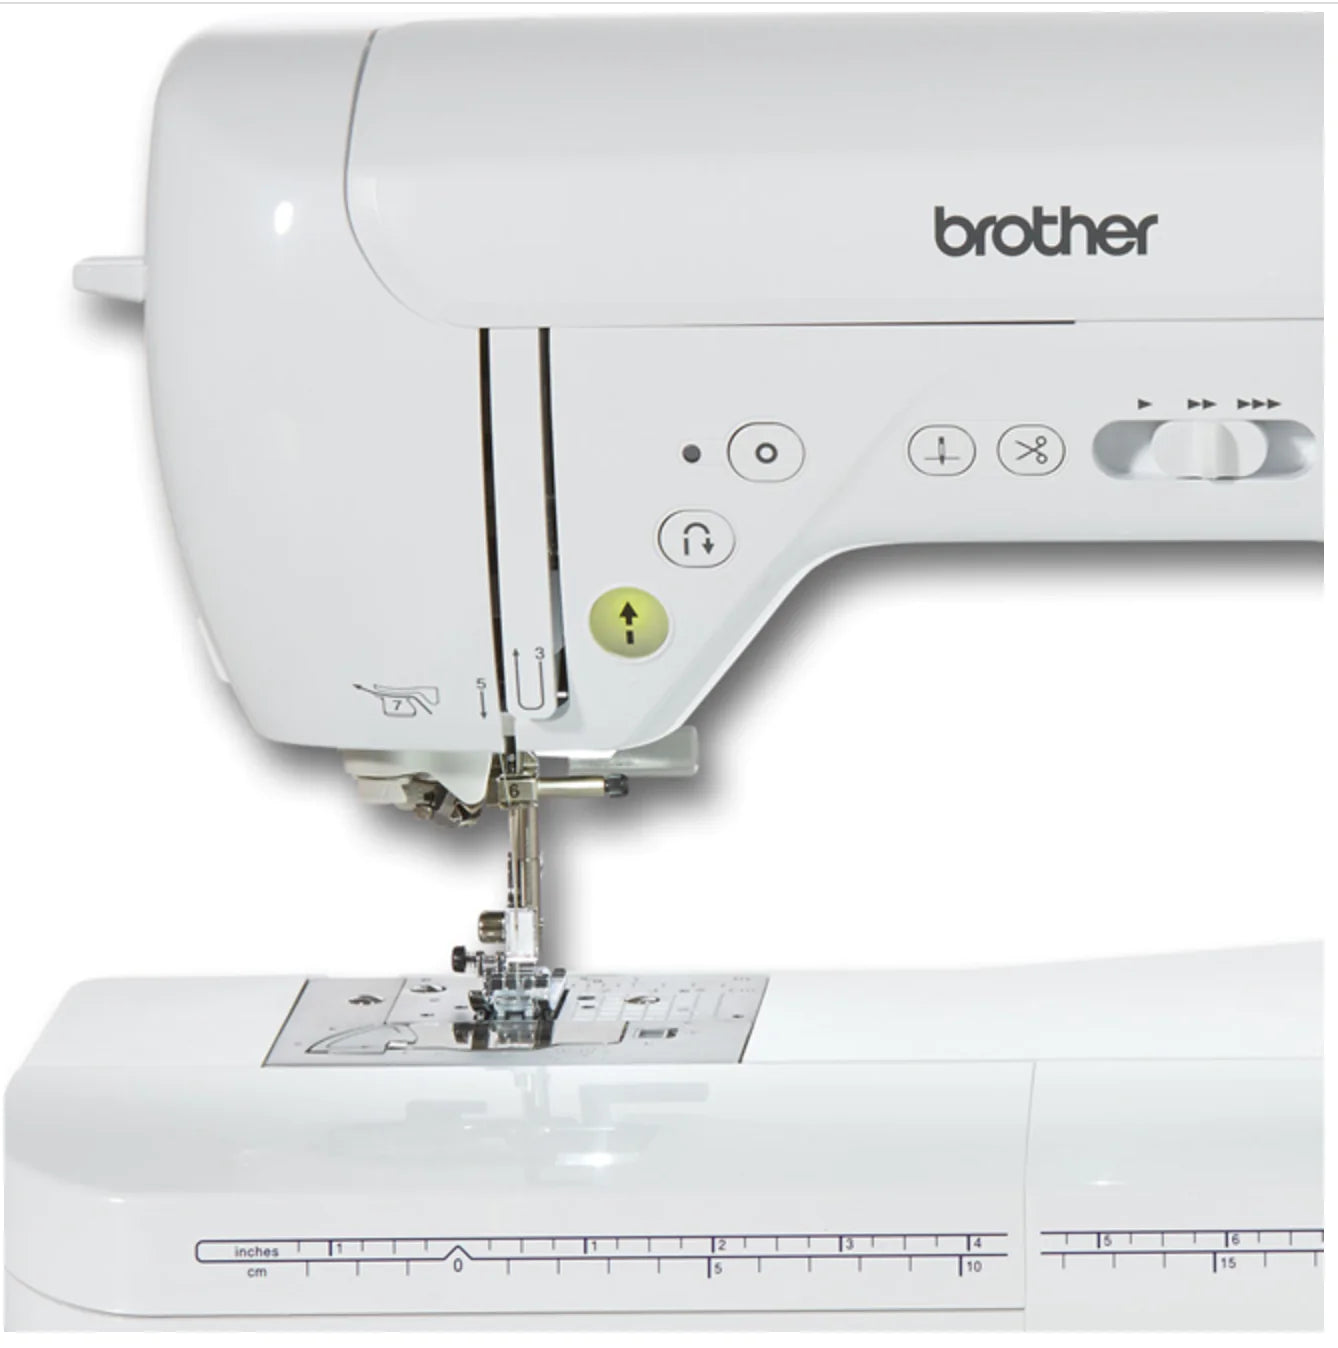 Close-up view of the Brother Innov-is F420 sewing machine's stitching area, needle, and thread guide, with easy-to-use function buttons and stitch selection keys.